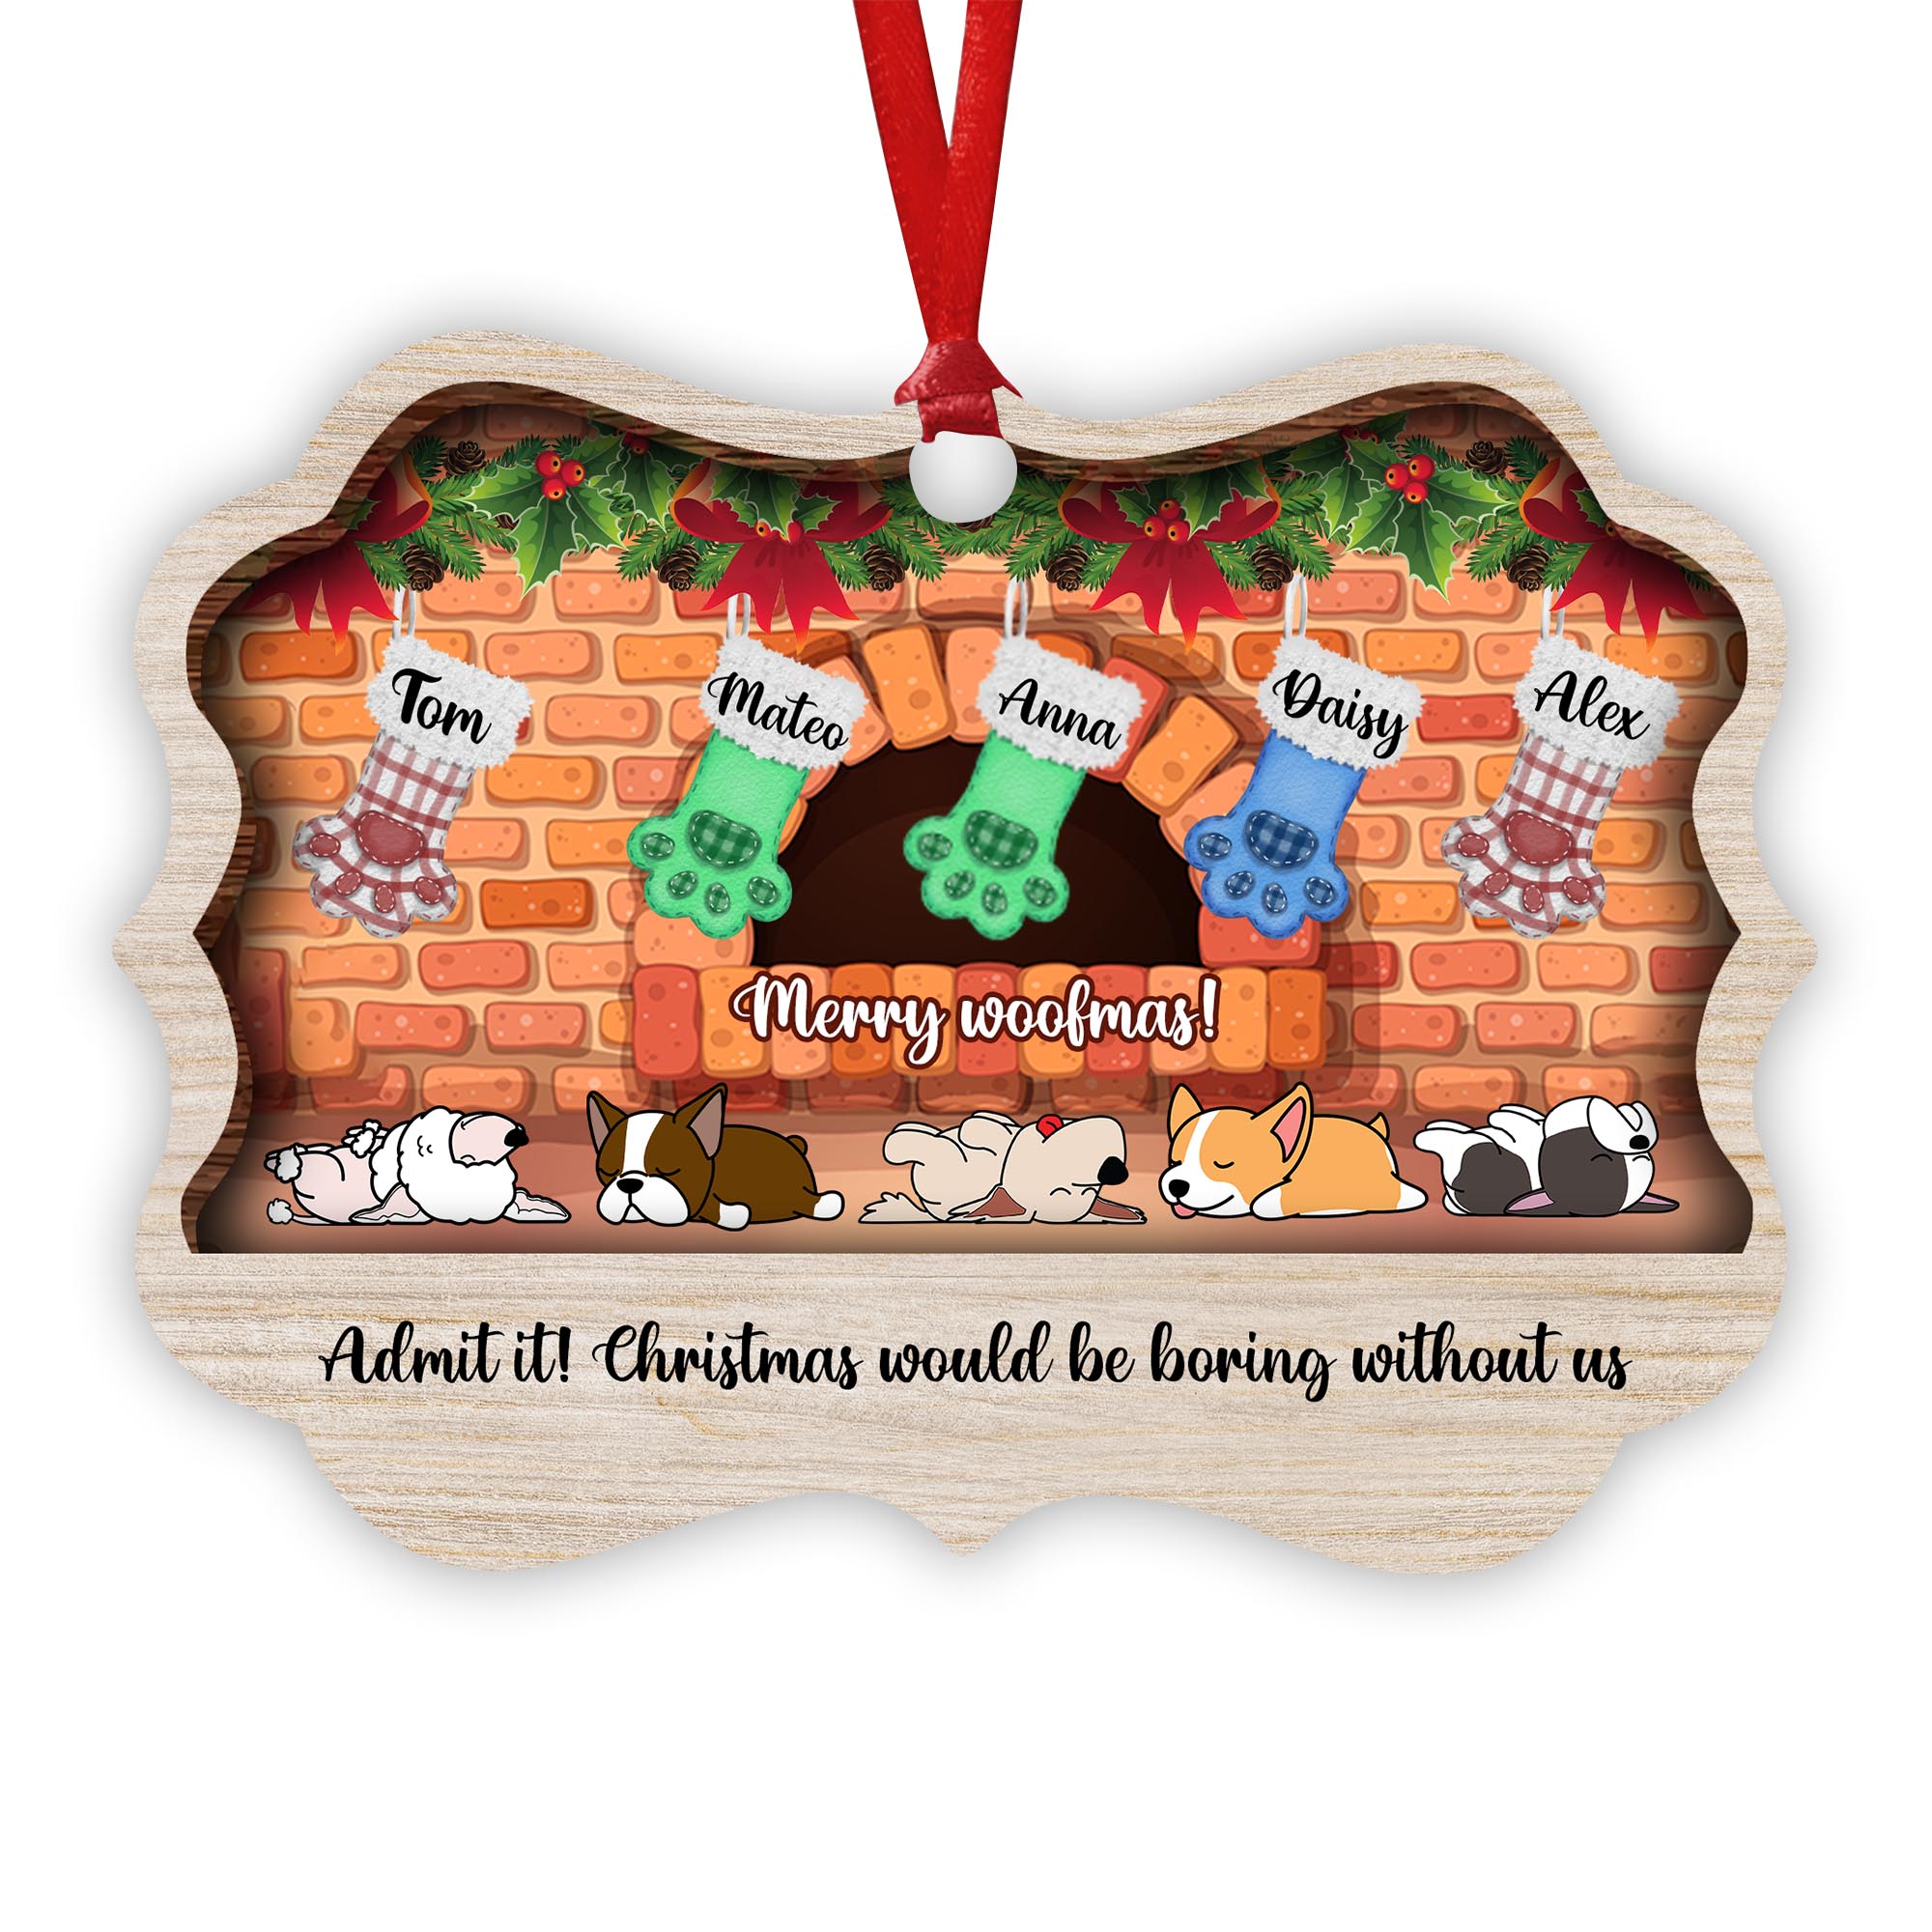 Admit it! Christmas Would Be Boring Without Me Stocking Ornament - Personalized Aluminum Ornament